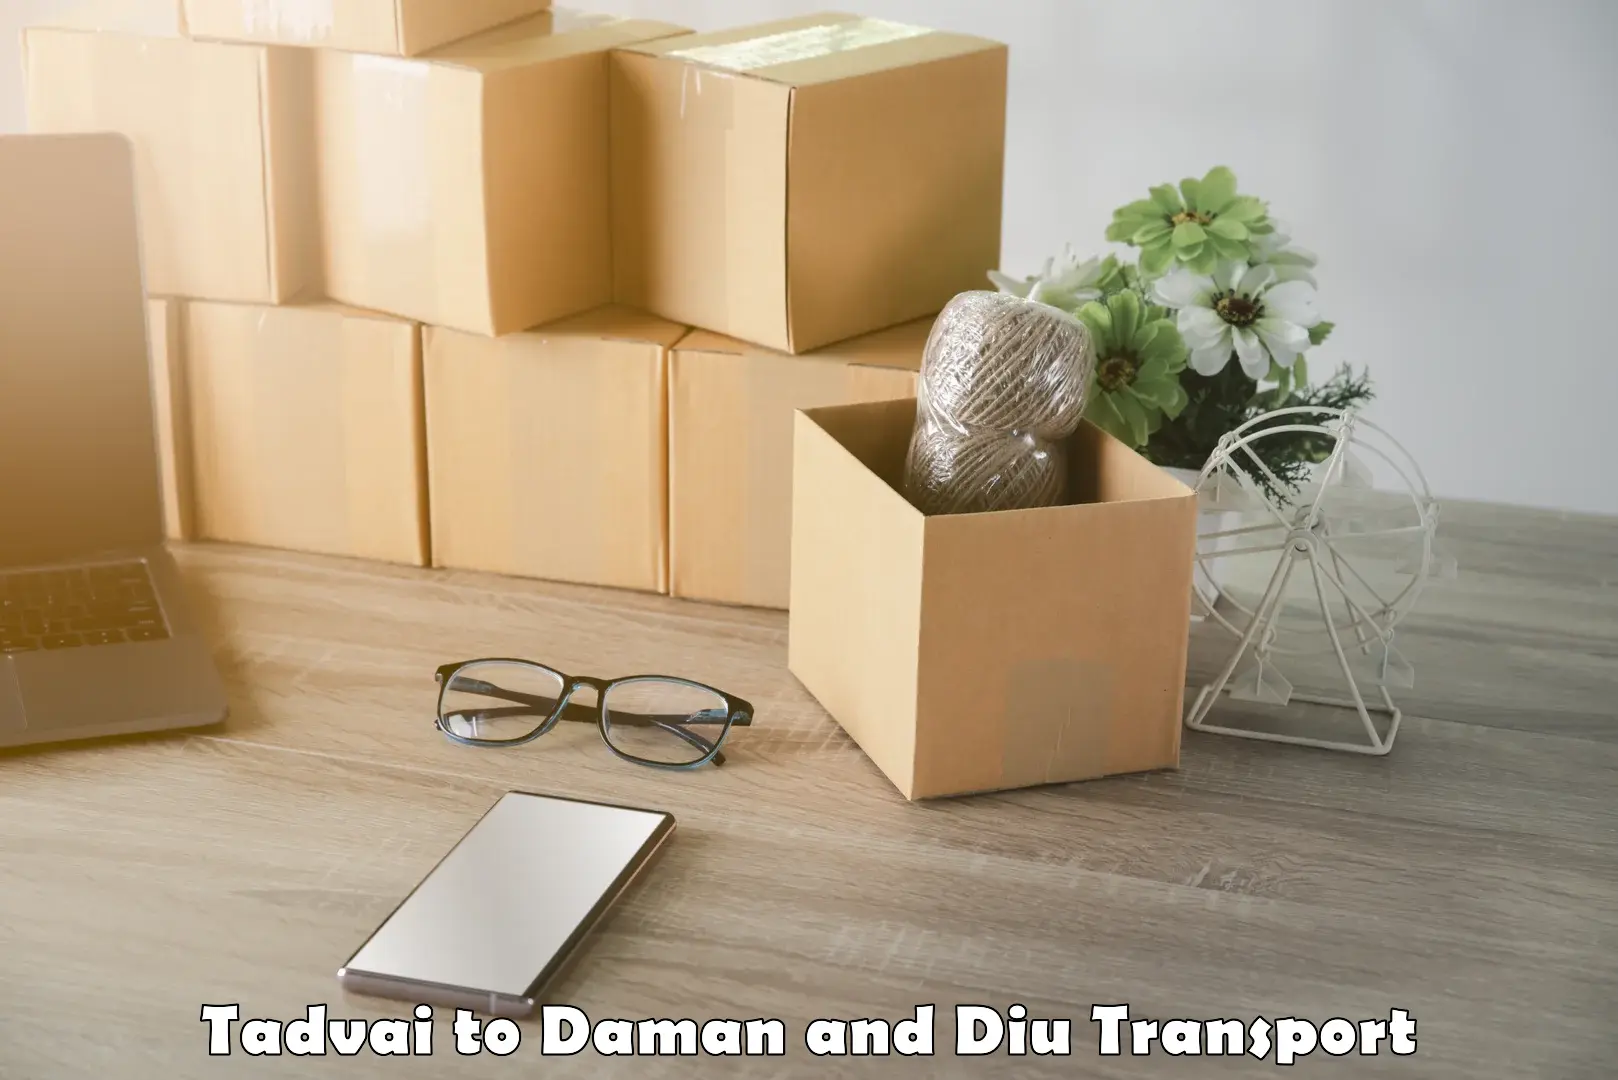 Express transport services in Tadvai to Diu